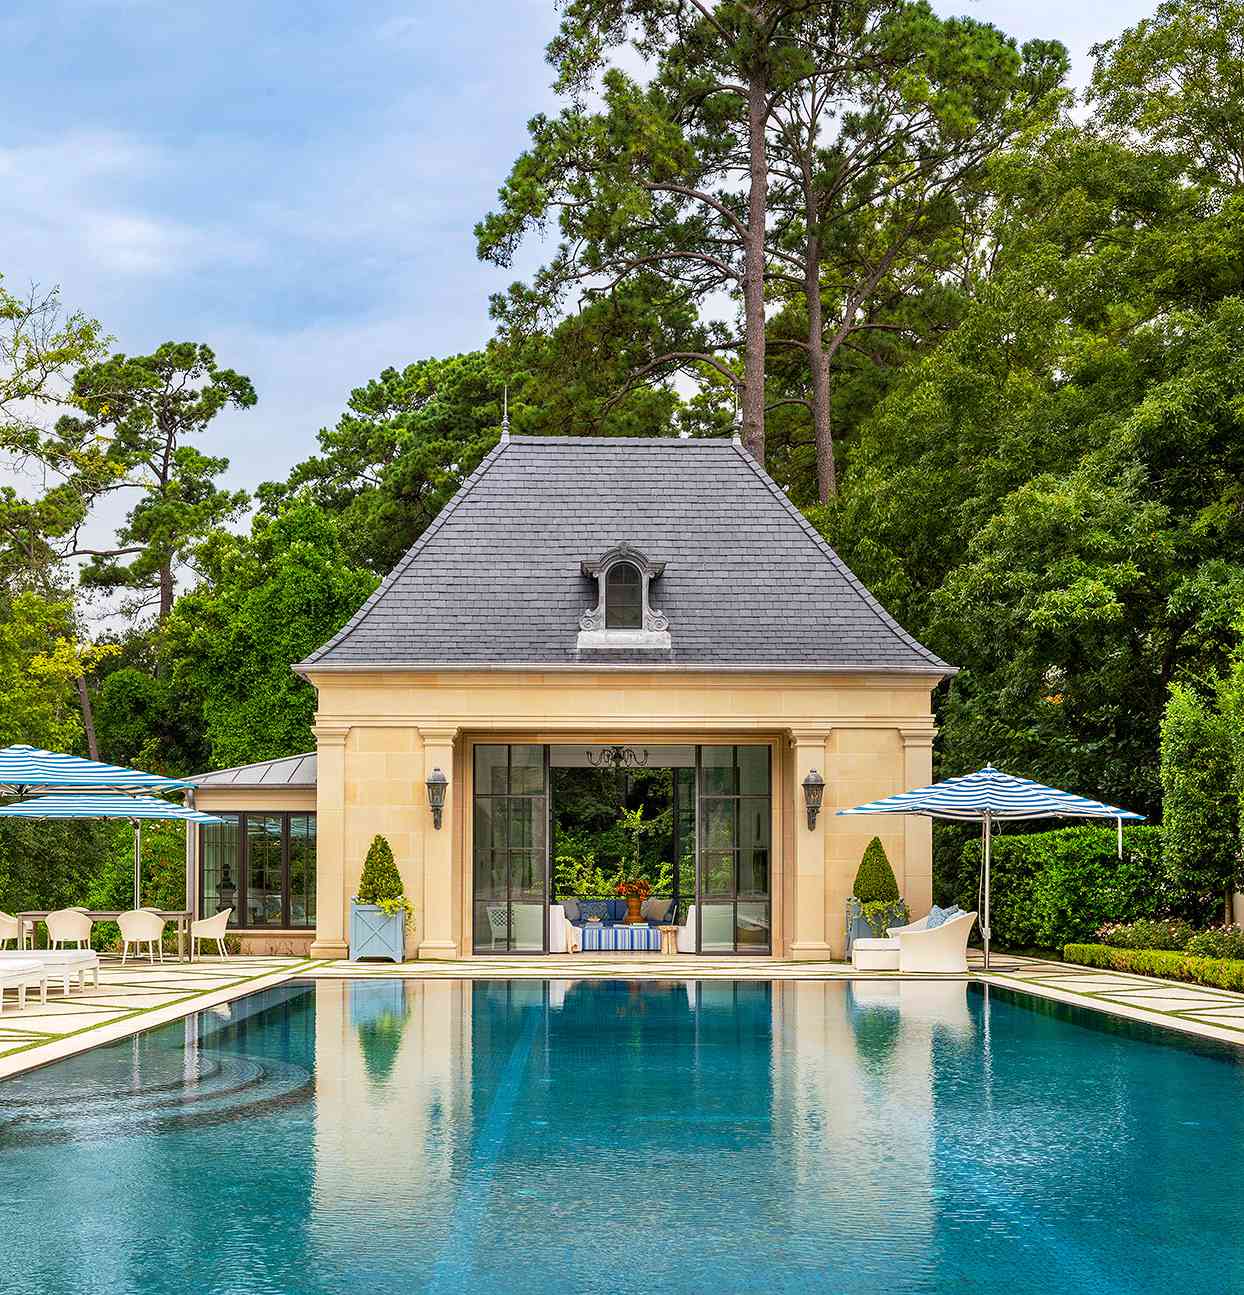 french chateau-inspired pool house blue striped umbrellas trees